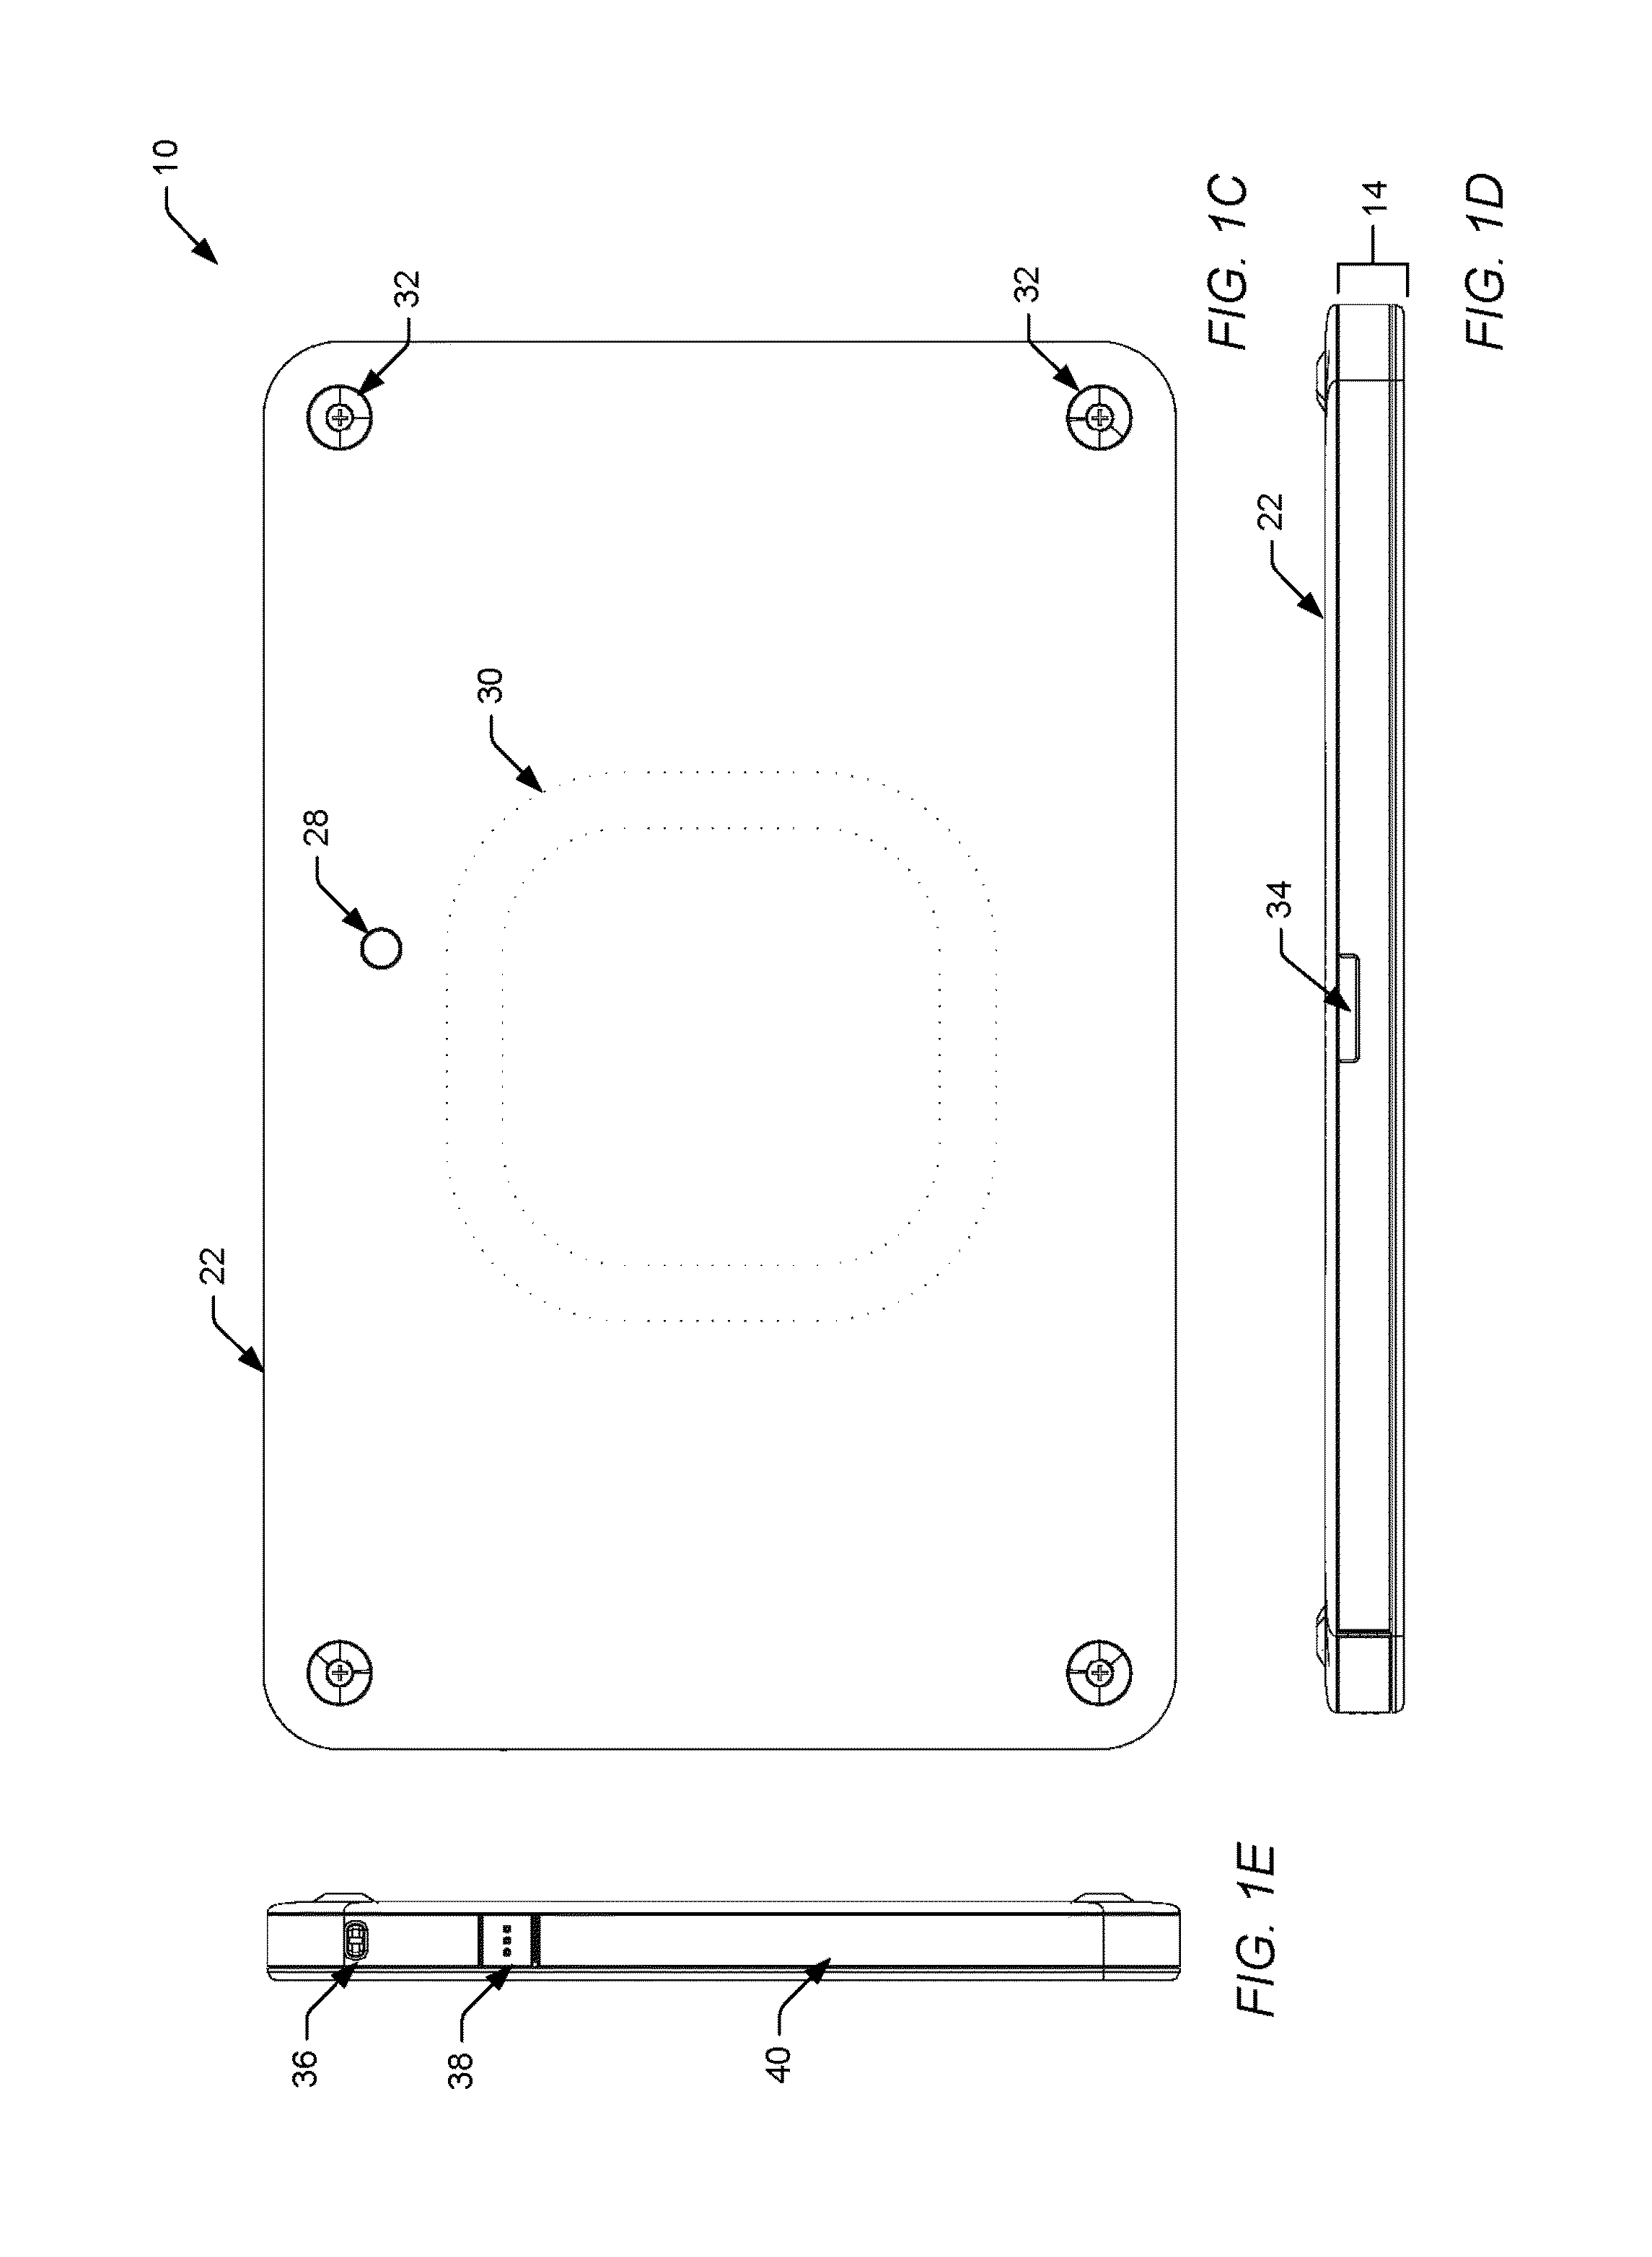 Portable electronic device having integrated peripheral expansion module